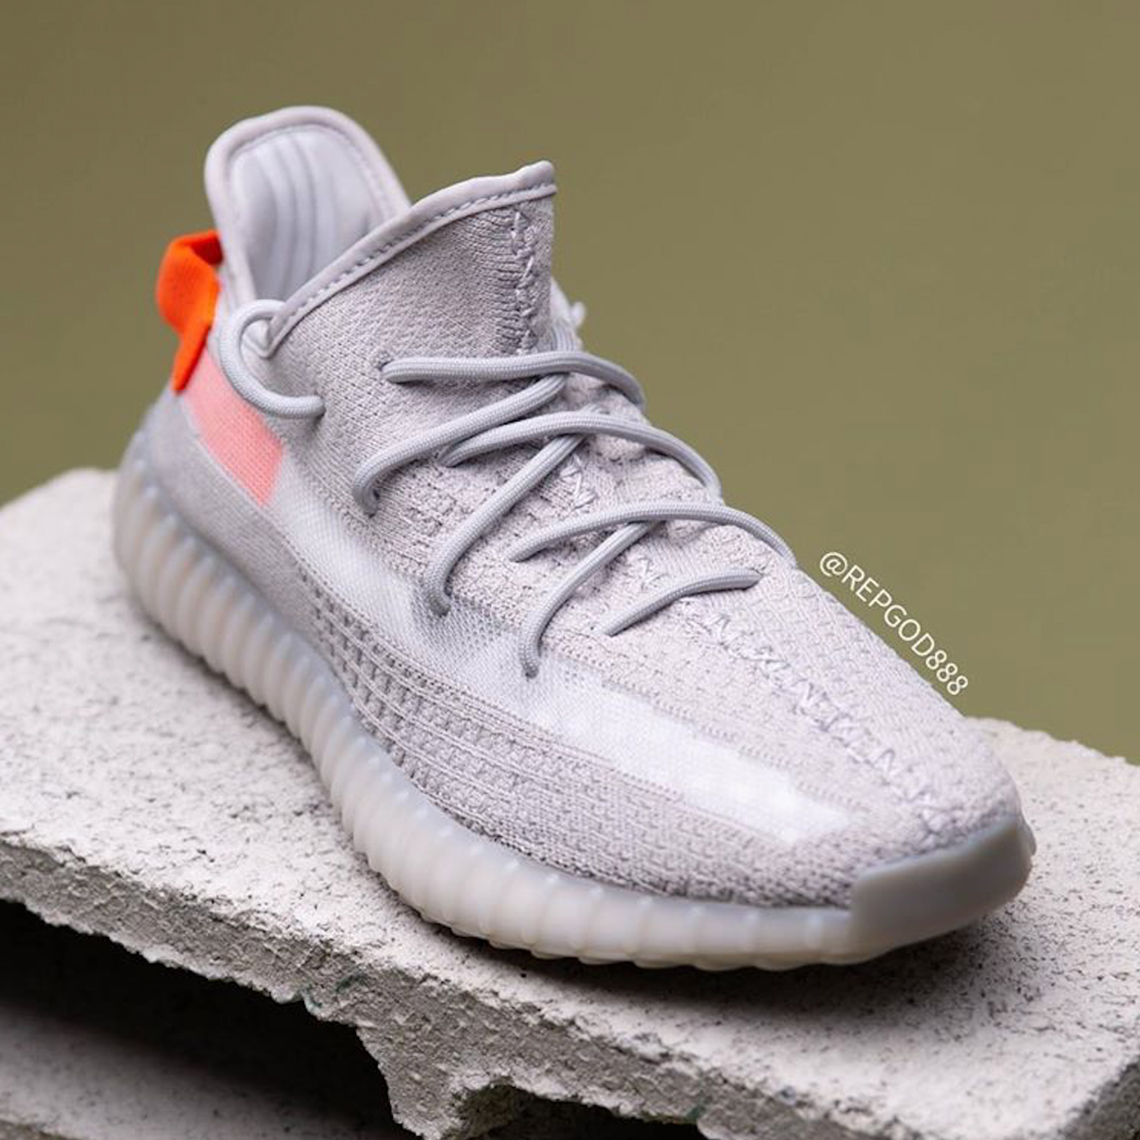 Cheap Yeezy Boost 350 V2 Light Menaposs Us Size 75 9 Wmns Gy3438